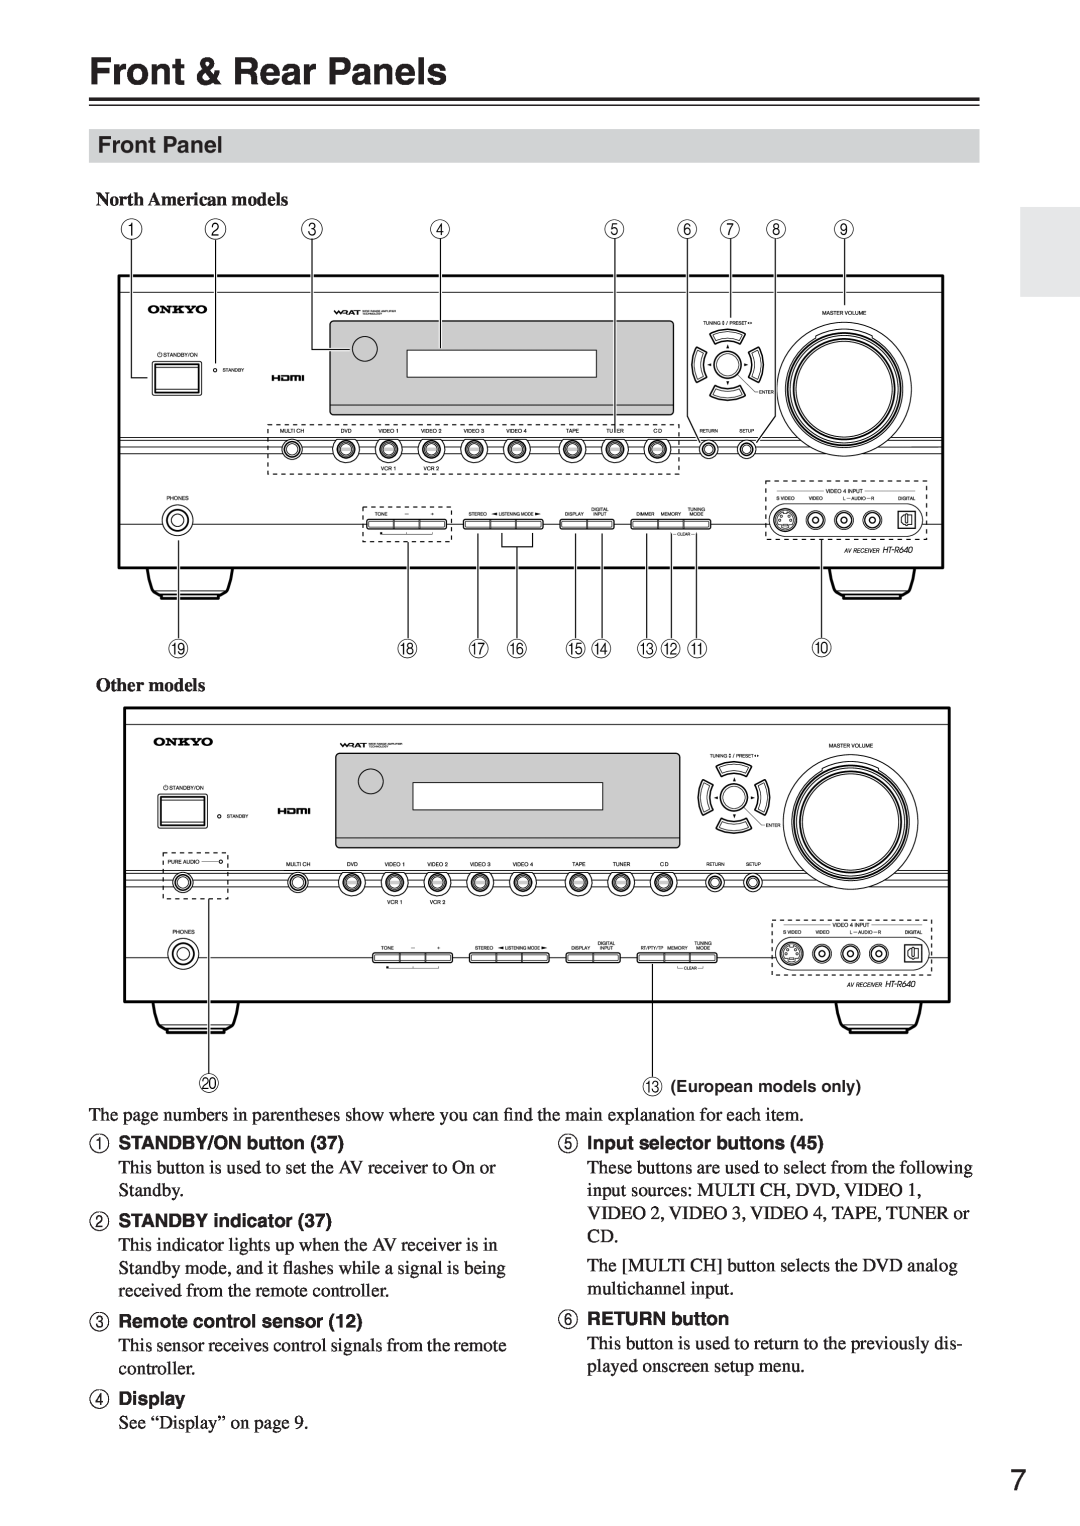 Onkyo HT-R640 instruction manual Front & Rear Panels, Front Panel, North American models, Other models 